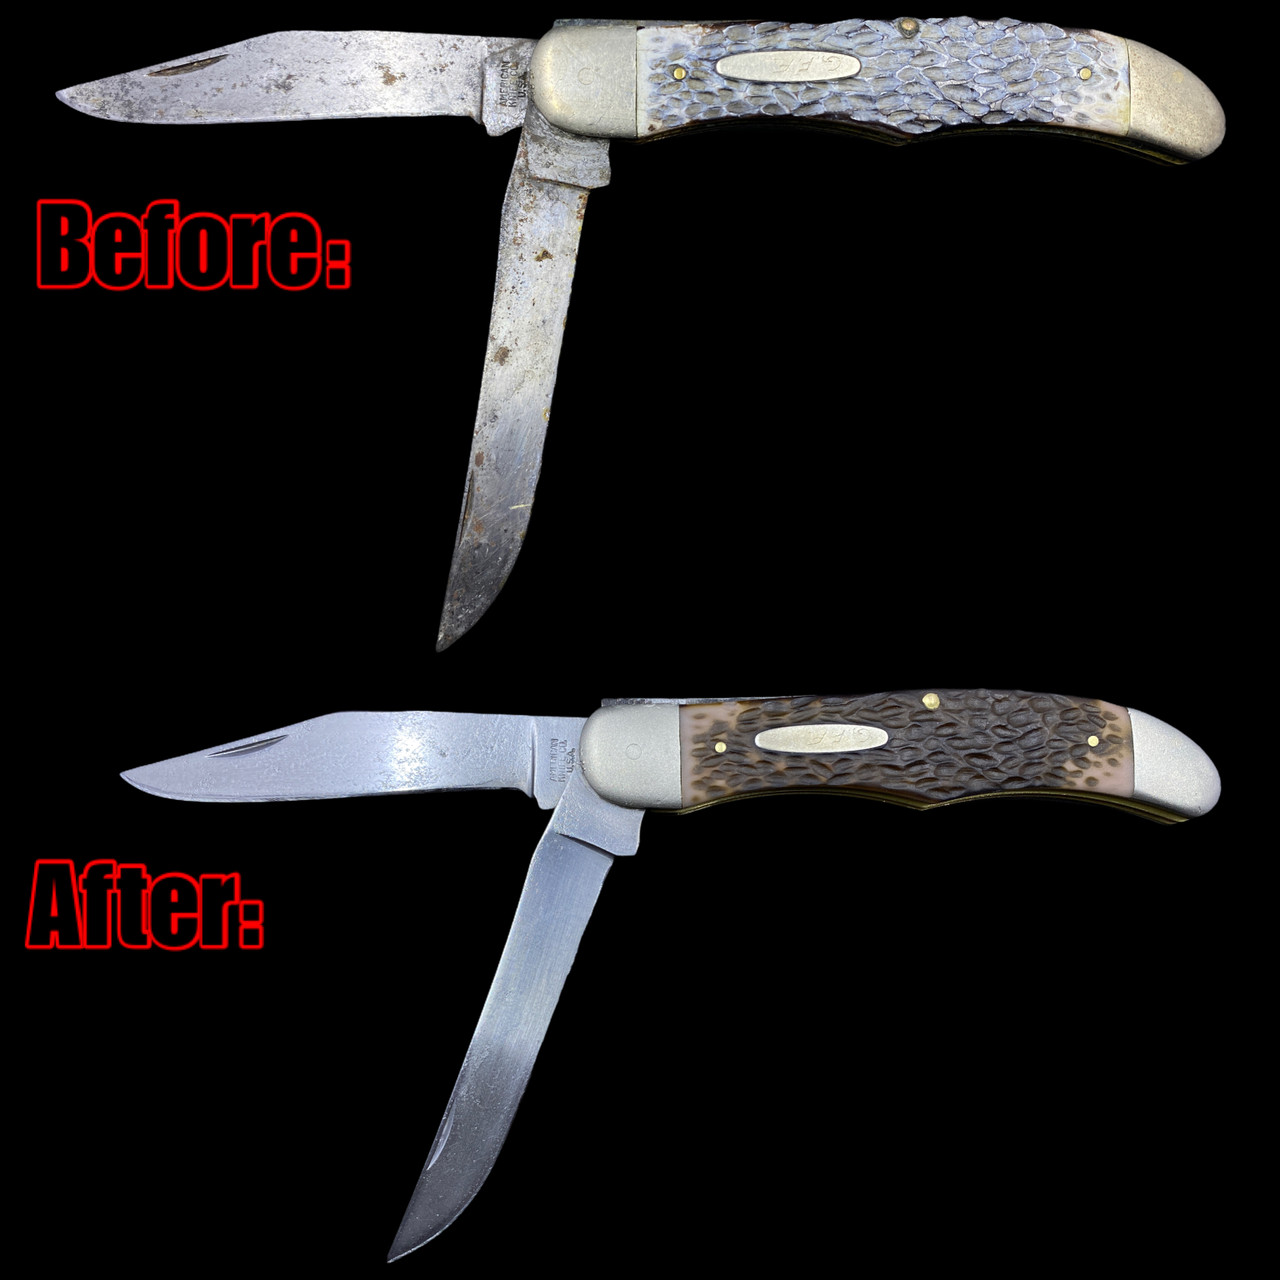 File:Knife blades to polish after sharpening.jpg - Wikimedia Commons